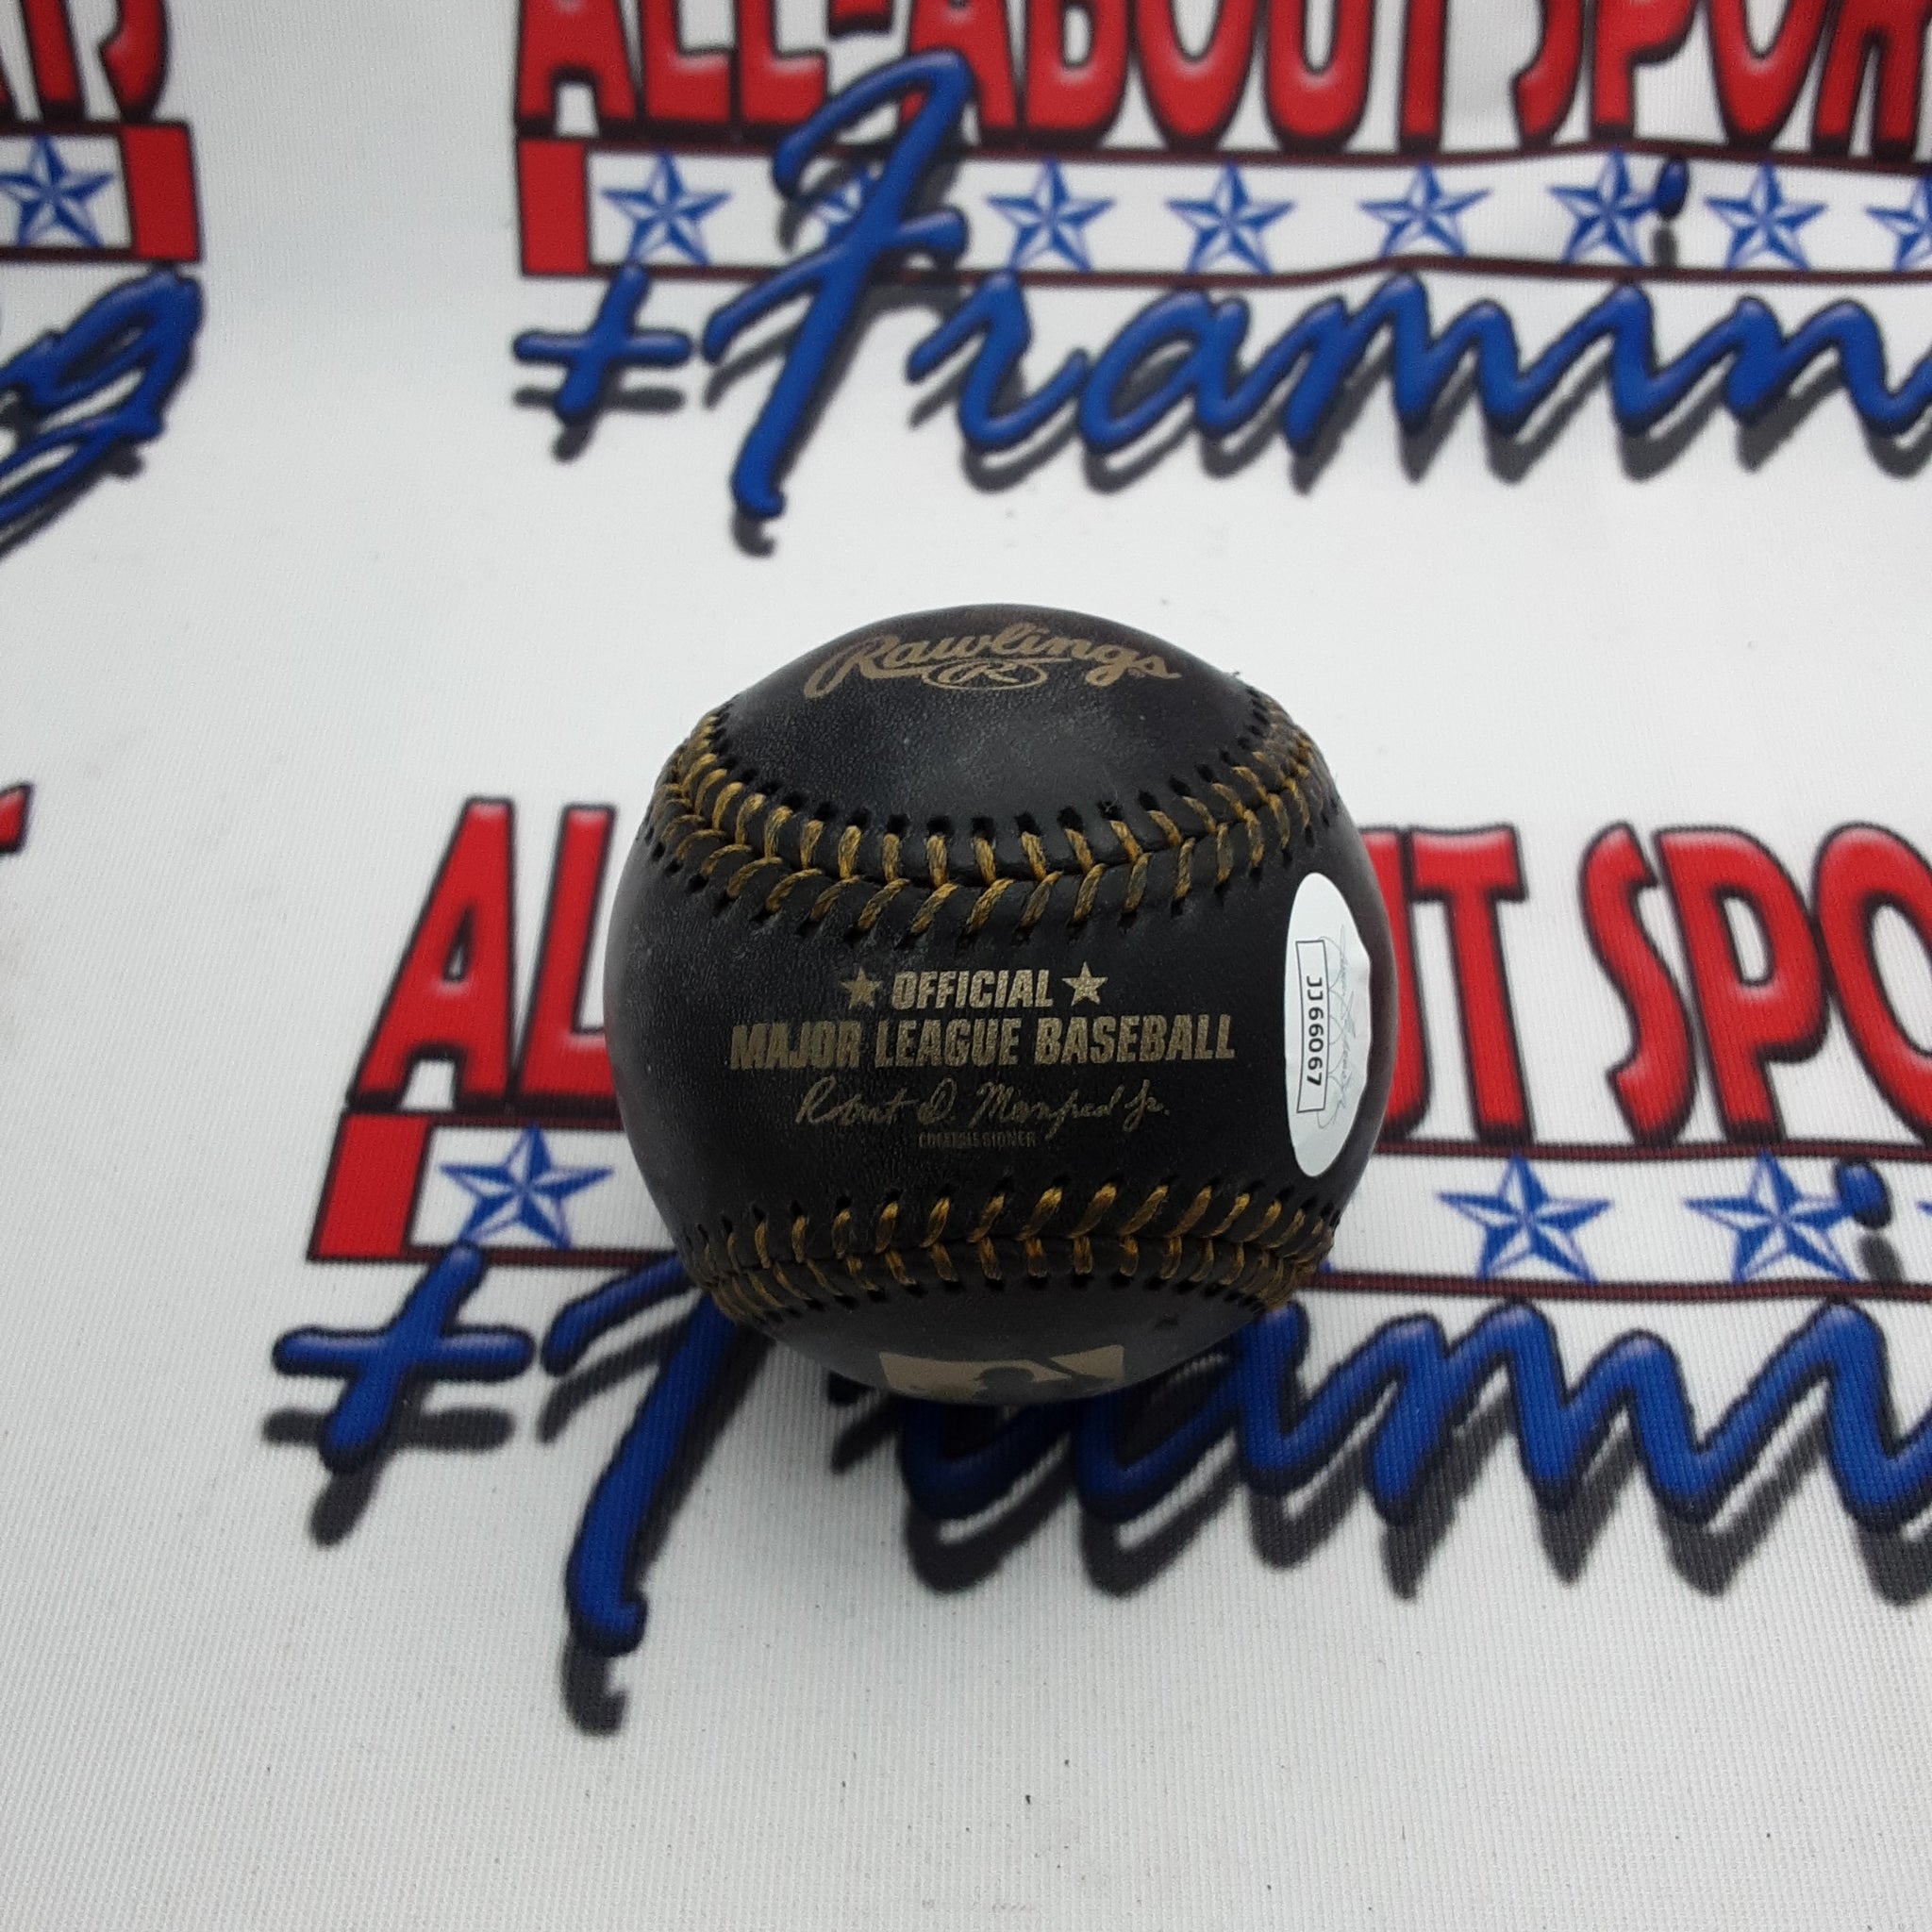 Andruw Jones Authentic Signed Baseball Autographed JSA.